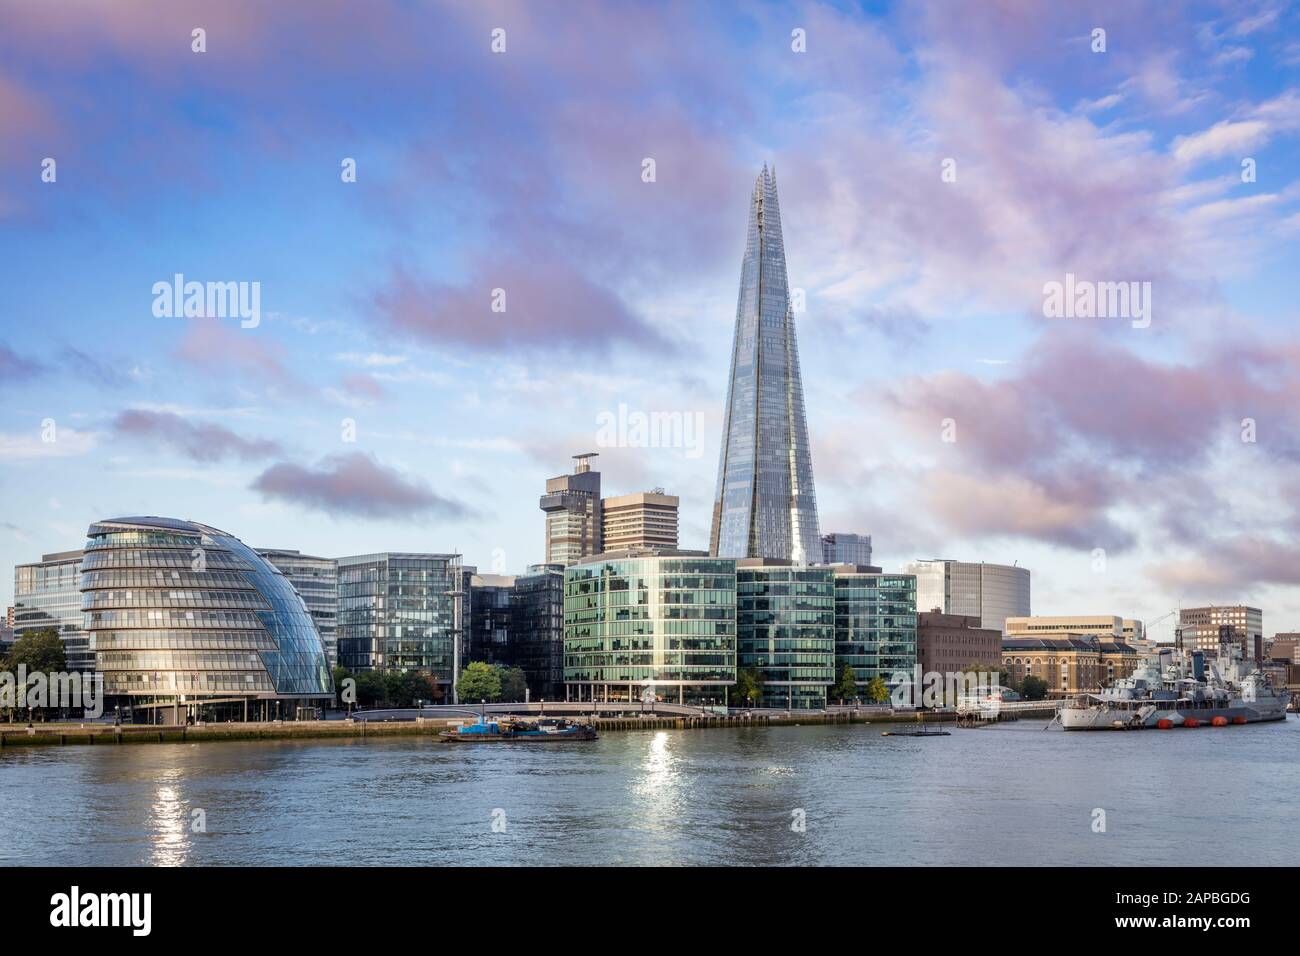 City Hall, the Shard and HMS Belfast along the South Bank, River Thames, London, England, UK Stock Photo